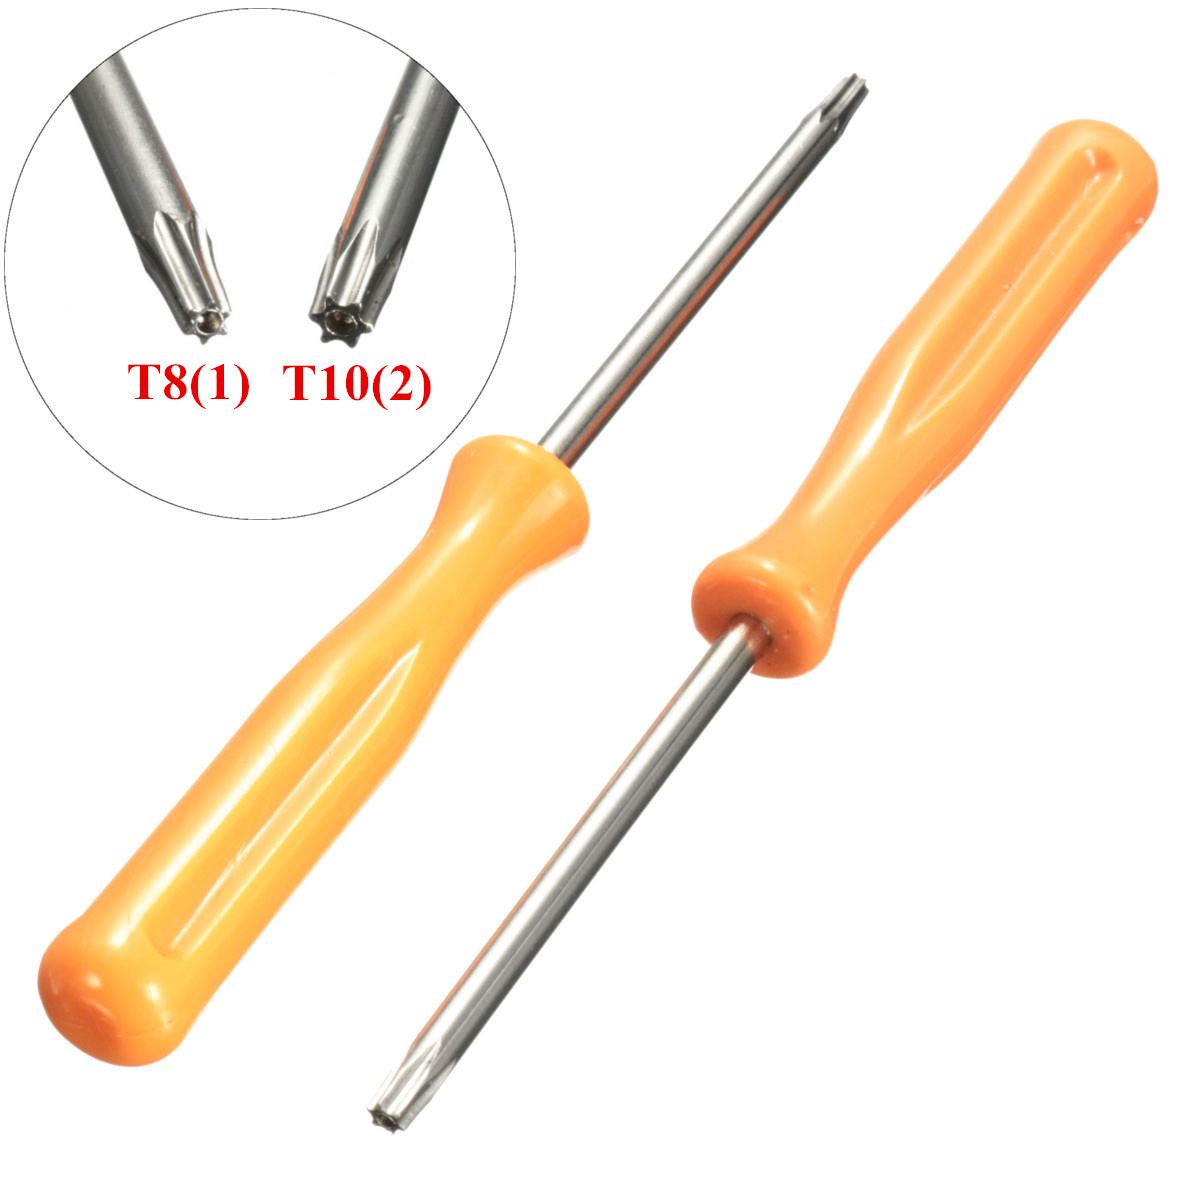 

Torx T8/T10 Security Screwdriver Tool for Xbox 360/PS3/PS4 Tamper Proof Hole